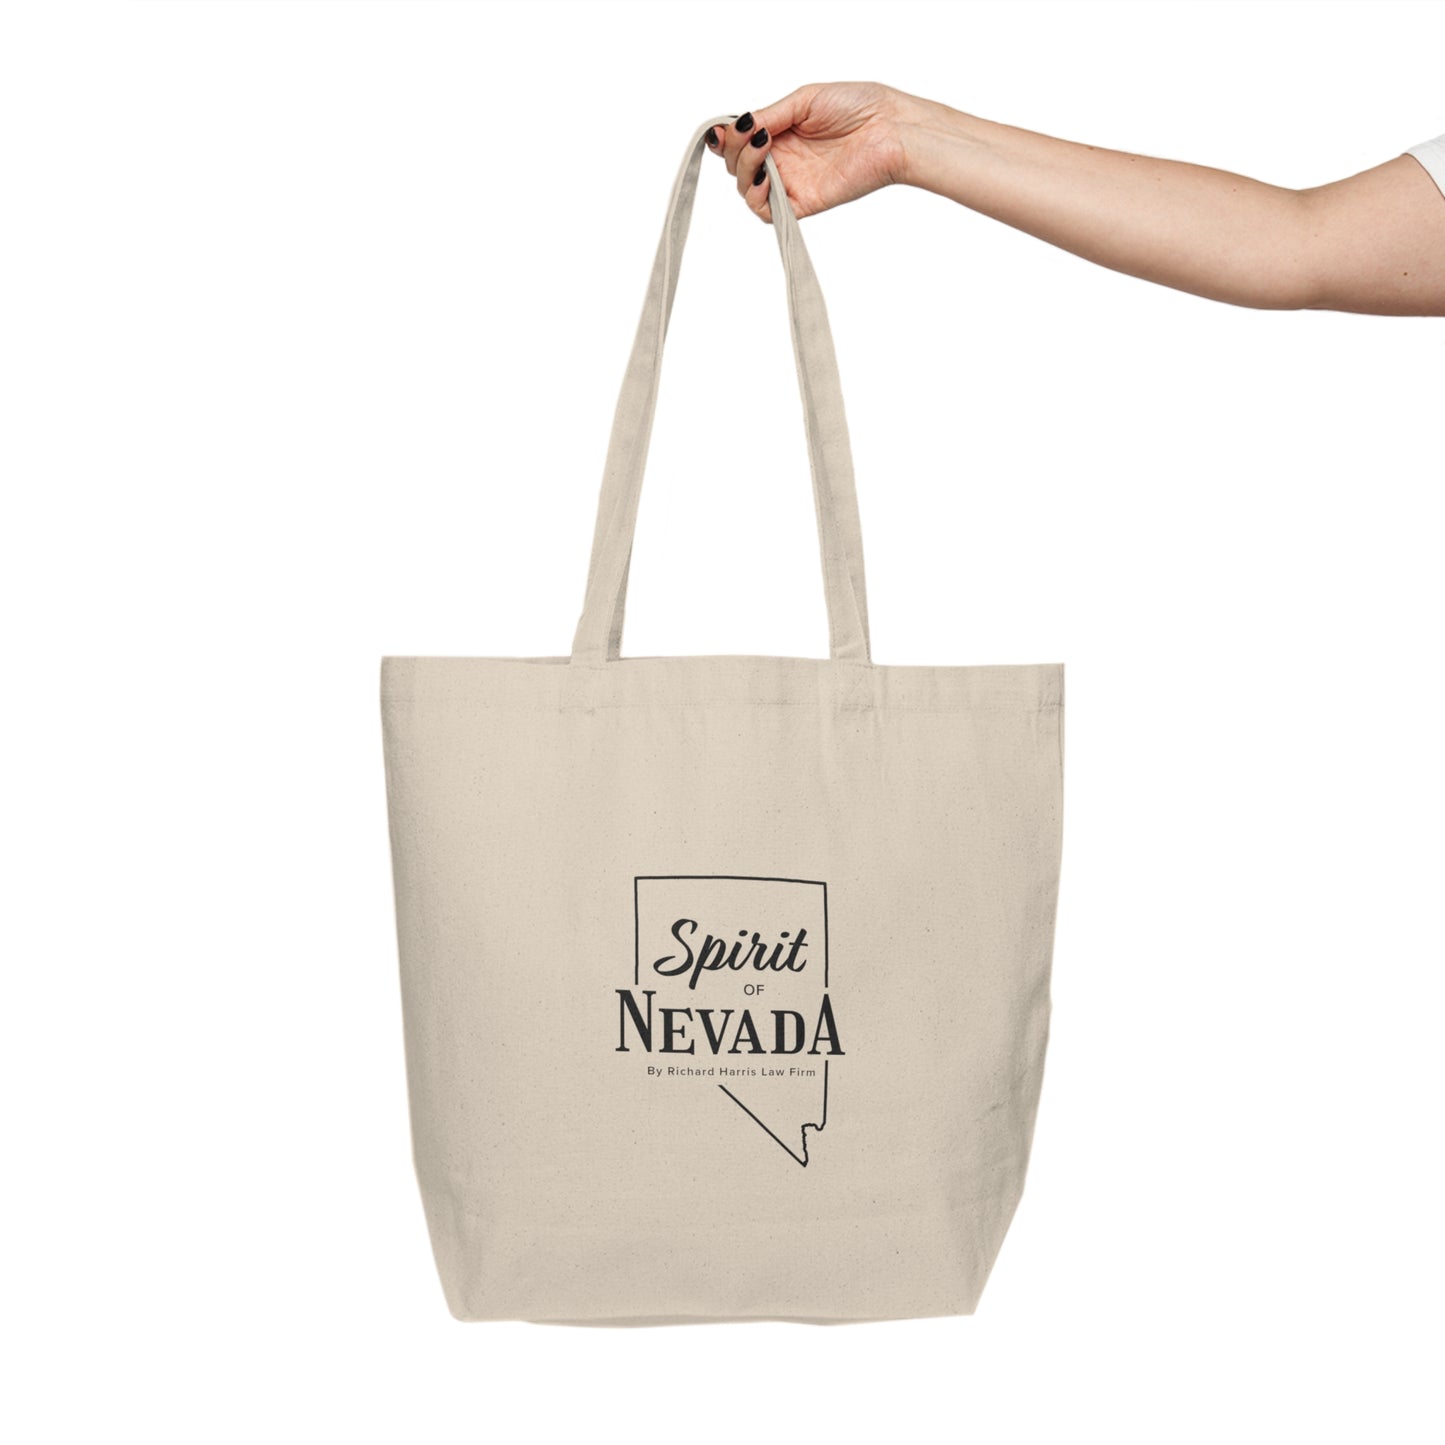 Spirit of Nevada Canvas Shopping Tote